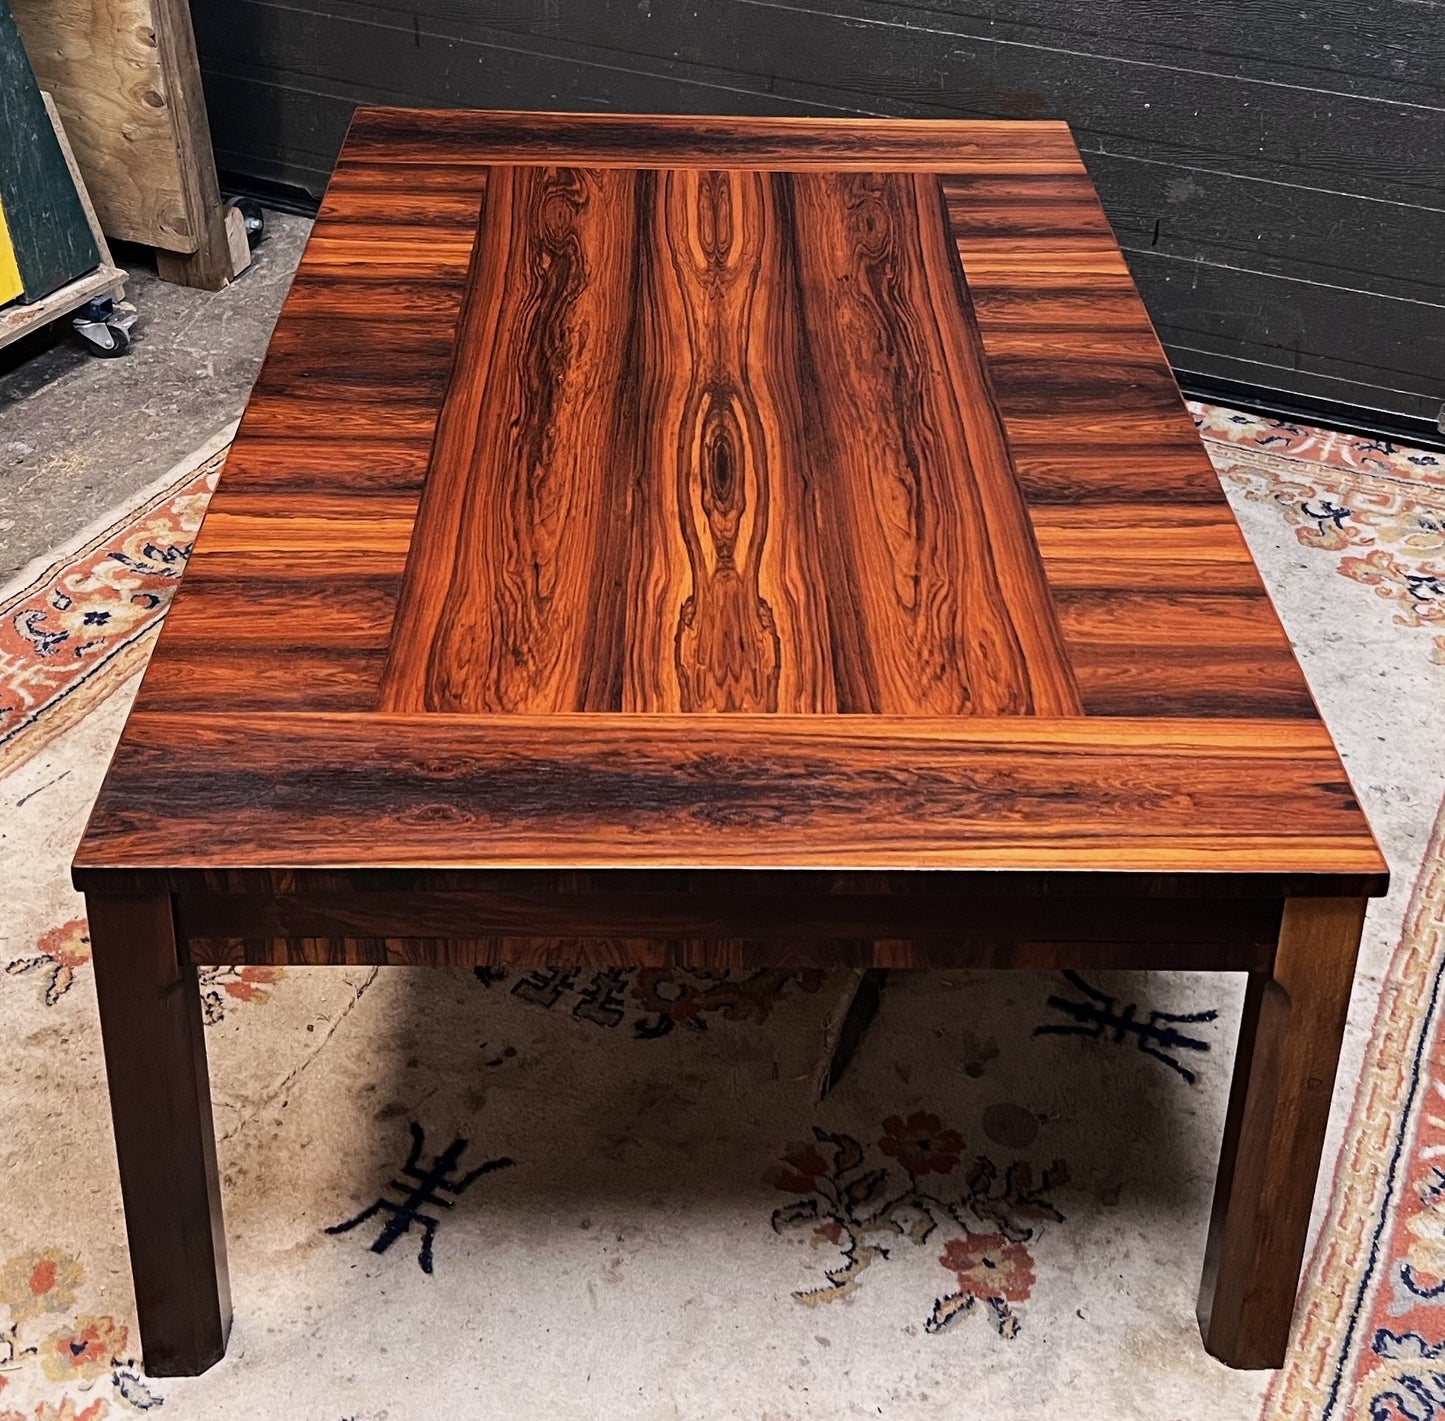 REFINISHED Danish Mid Century Modern Rosewood Coffee Table, Large